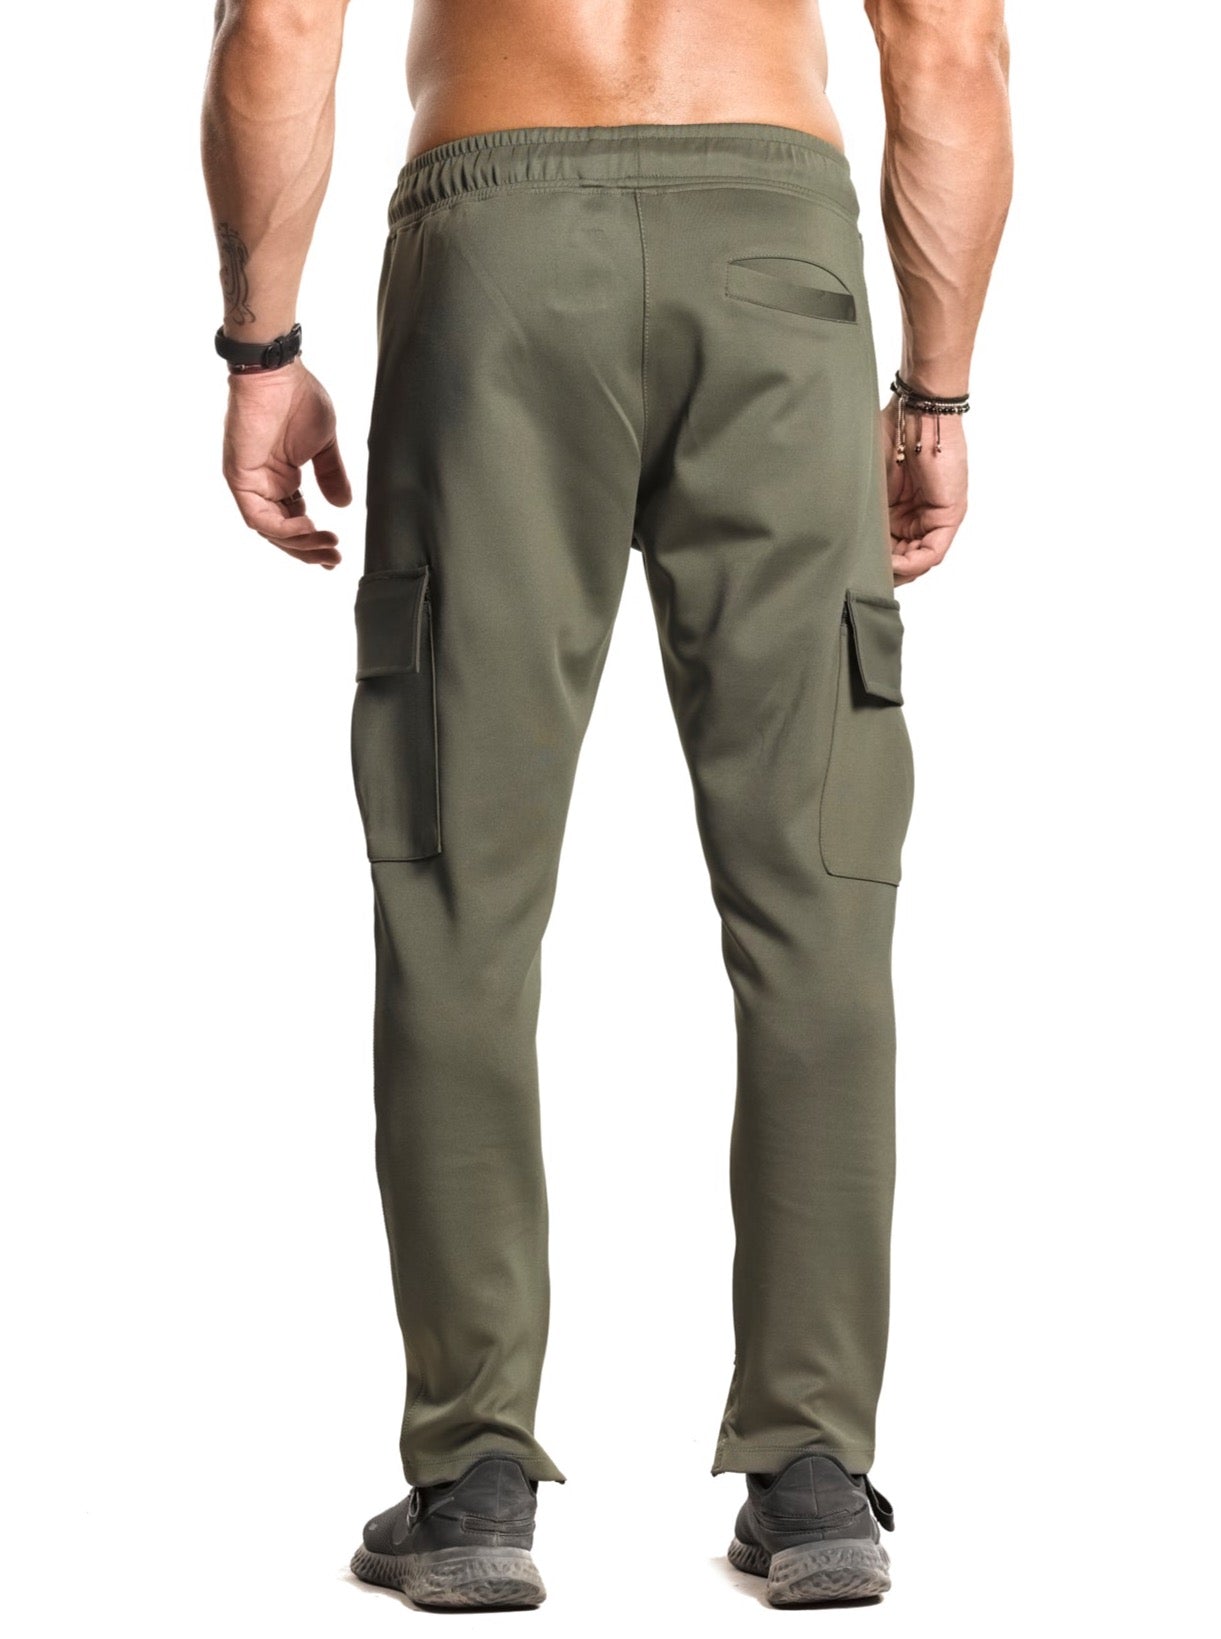 Tapered Cargo Zip Joggers - UPG [Olive Green] Limited Pieces - Sweatpants/Joggers - Gym Apparel Egypt